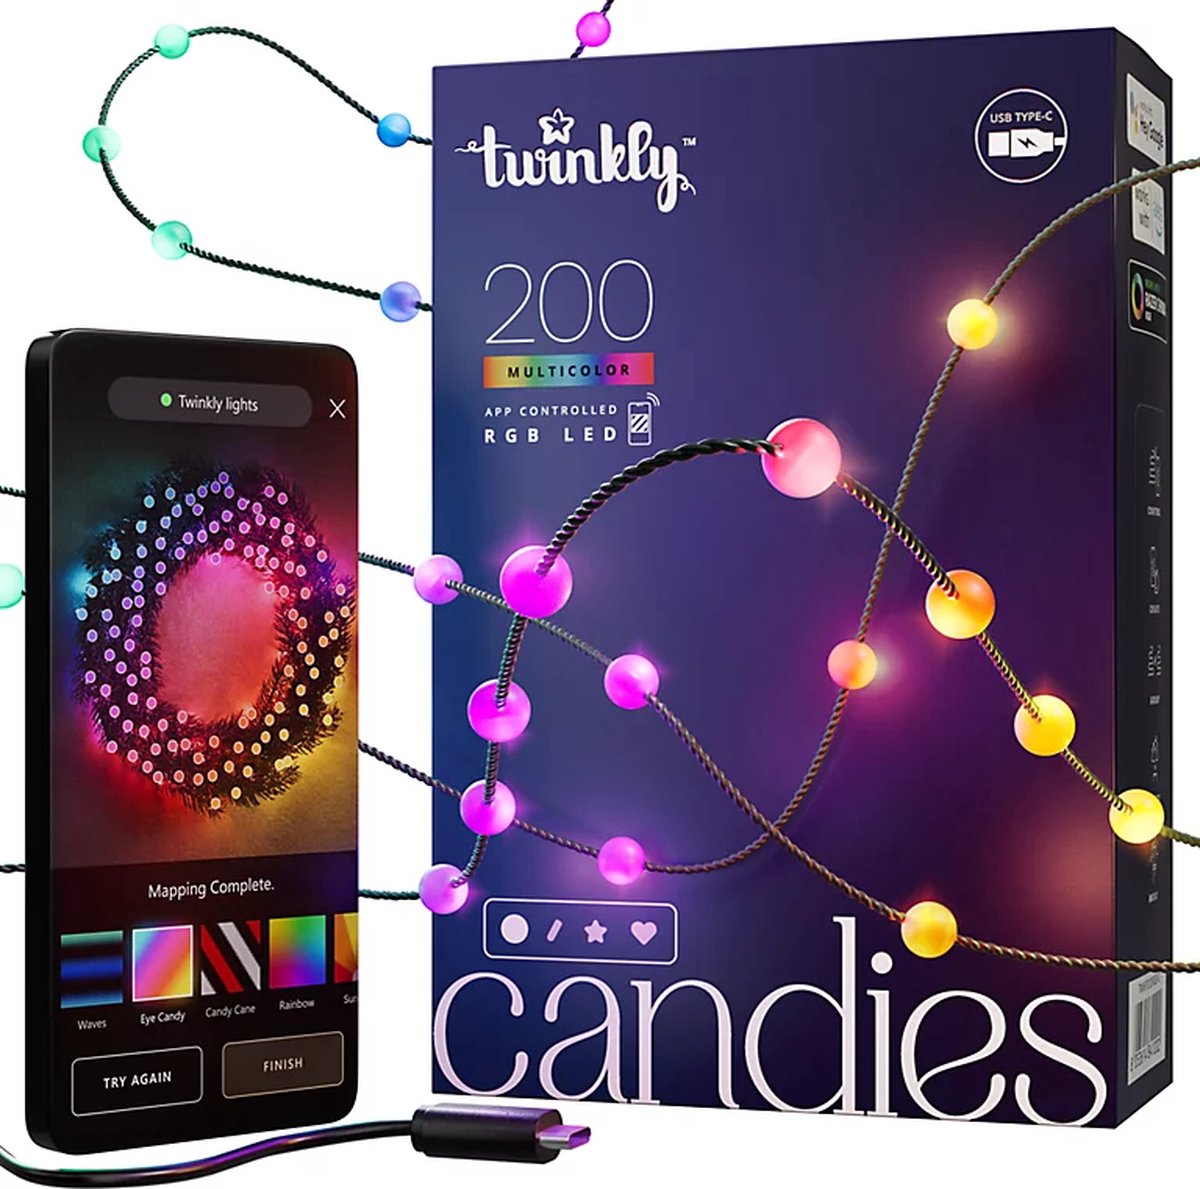 Twinkly Candies Lichtsnoer Pearl RGB Verlichtingsdecoratie 200 RGB LED s 6 meter Transparant